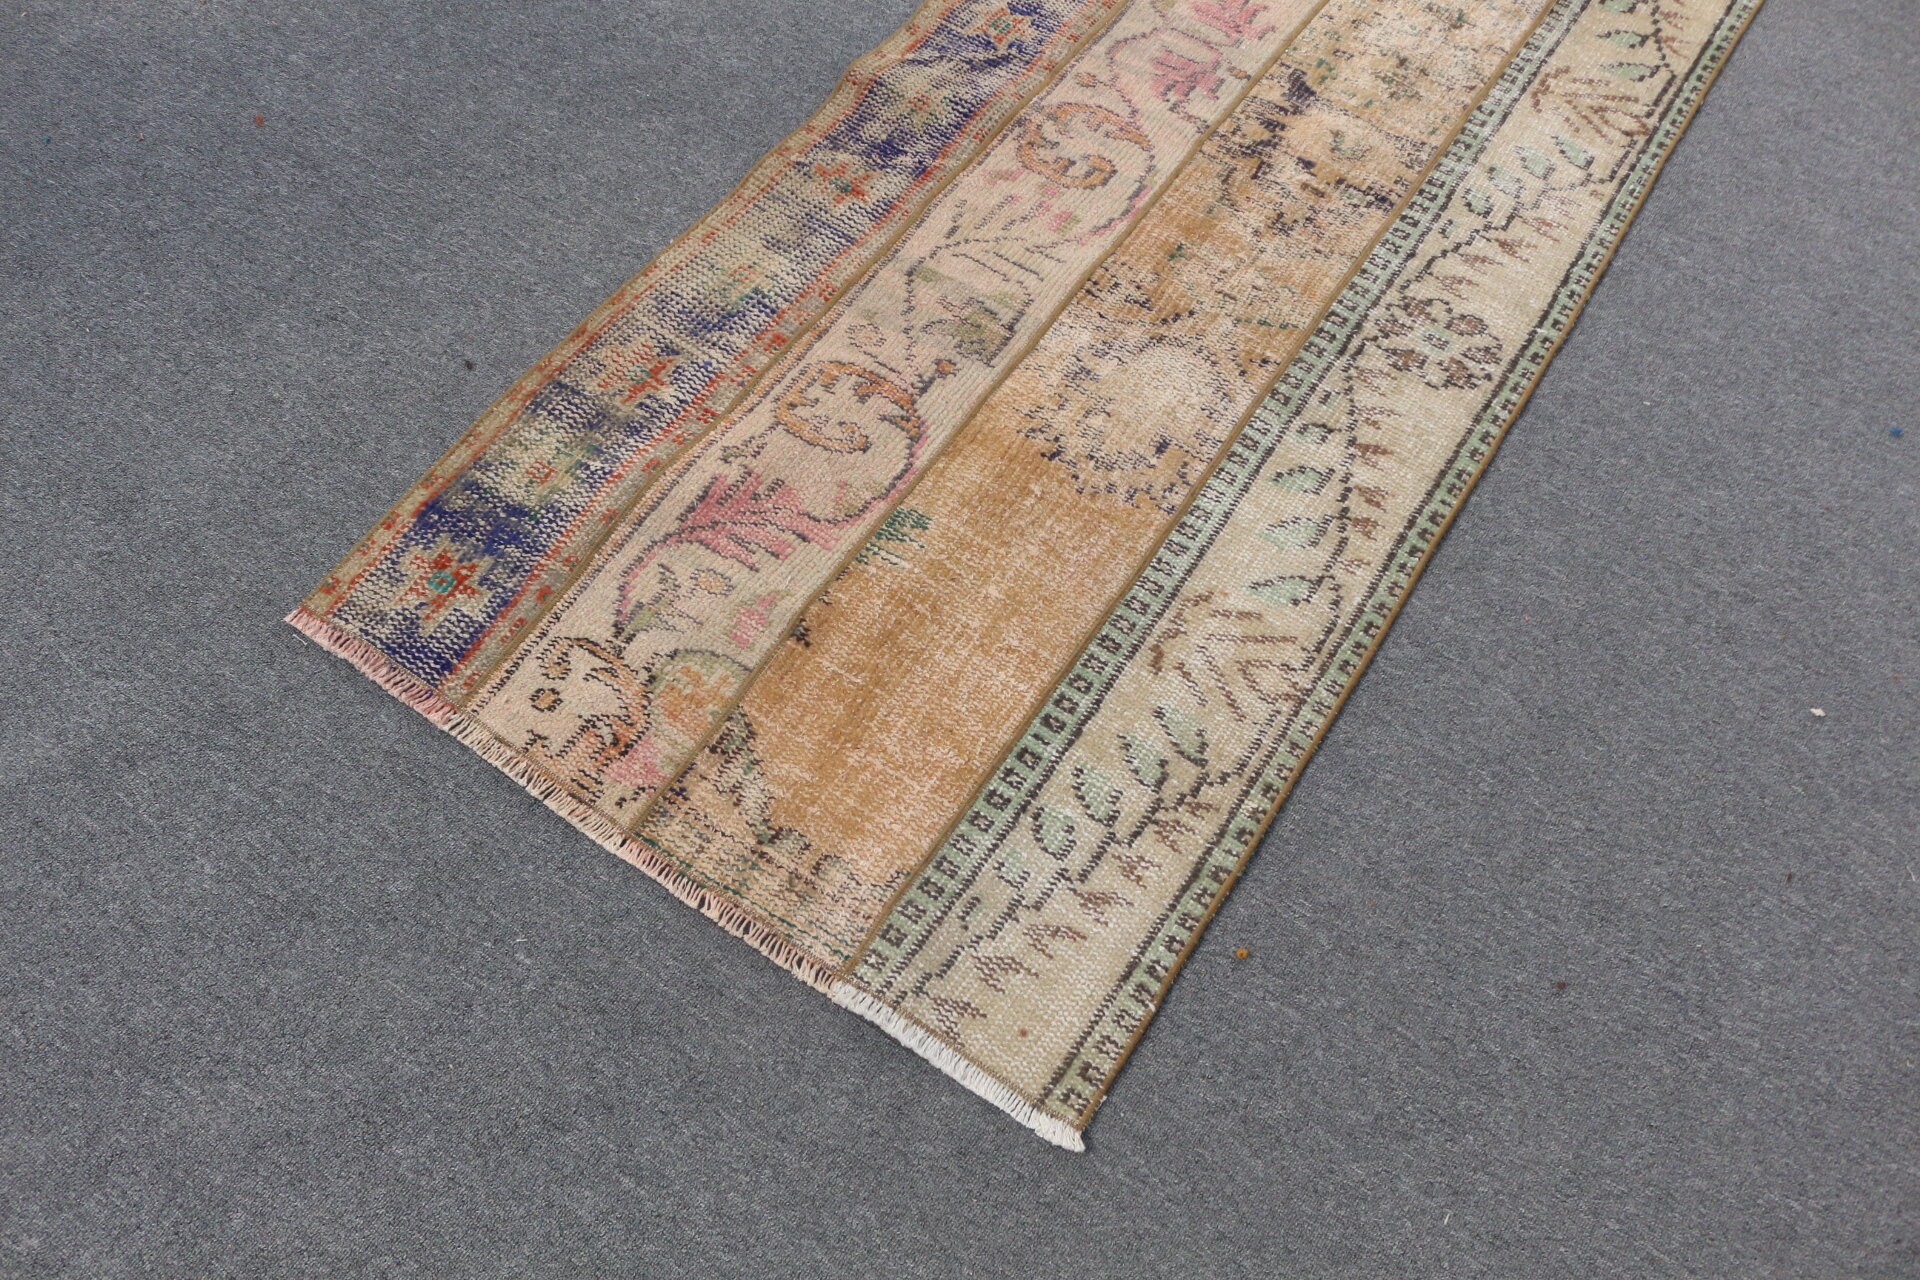 Kitchen Rugs, Anatolian Rug, 2.7x6 ft Accent Rugs, Entry Rug, Rugs for Bedroom, Cool Rug, Beige Antique Rug, Vintage Rug, Turkish Rugs